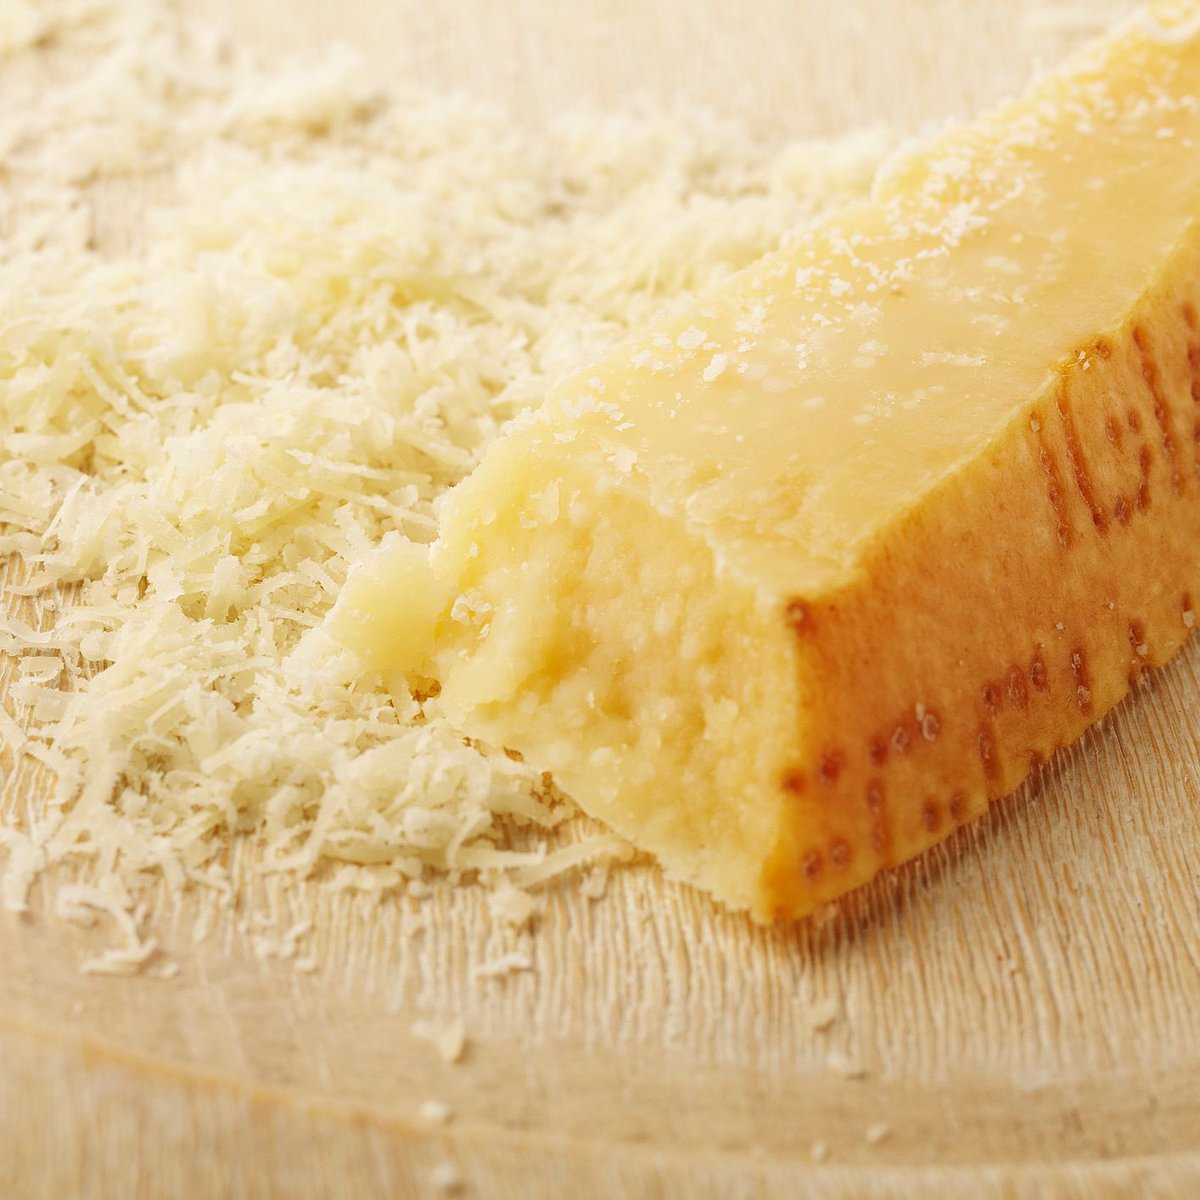 parmesan- gritty - nutty- quality is sus